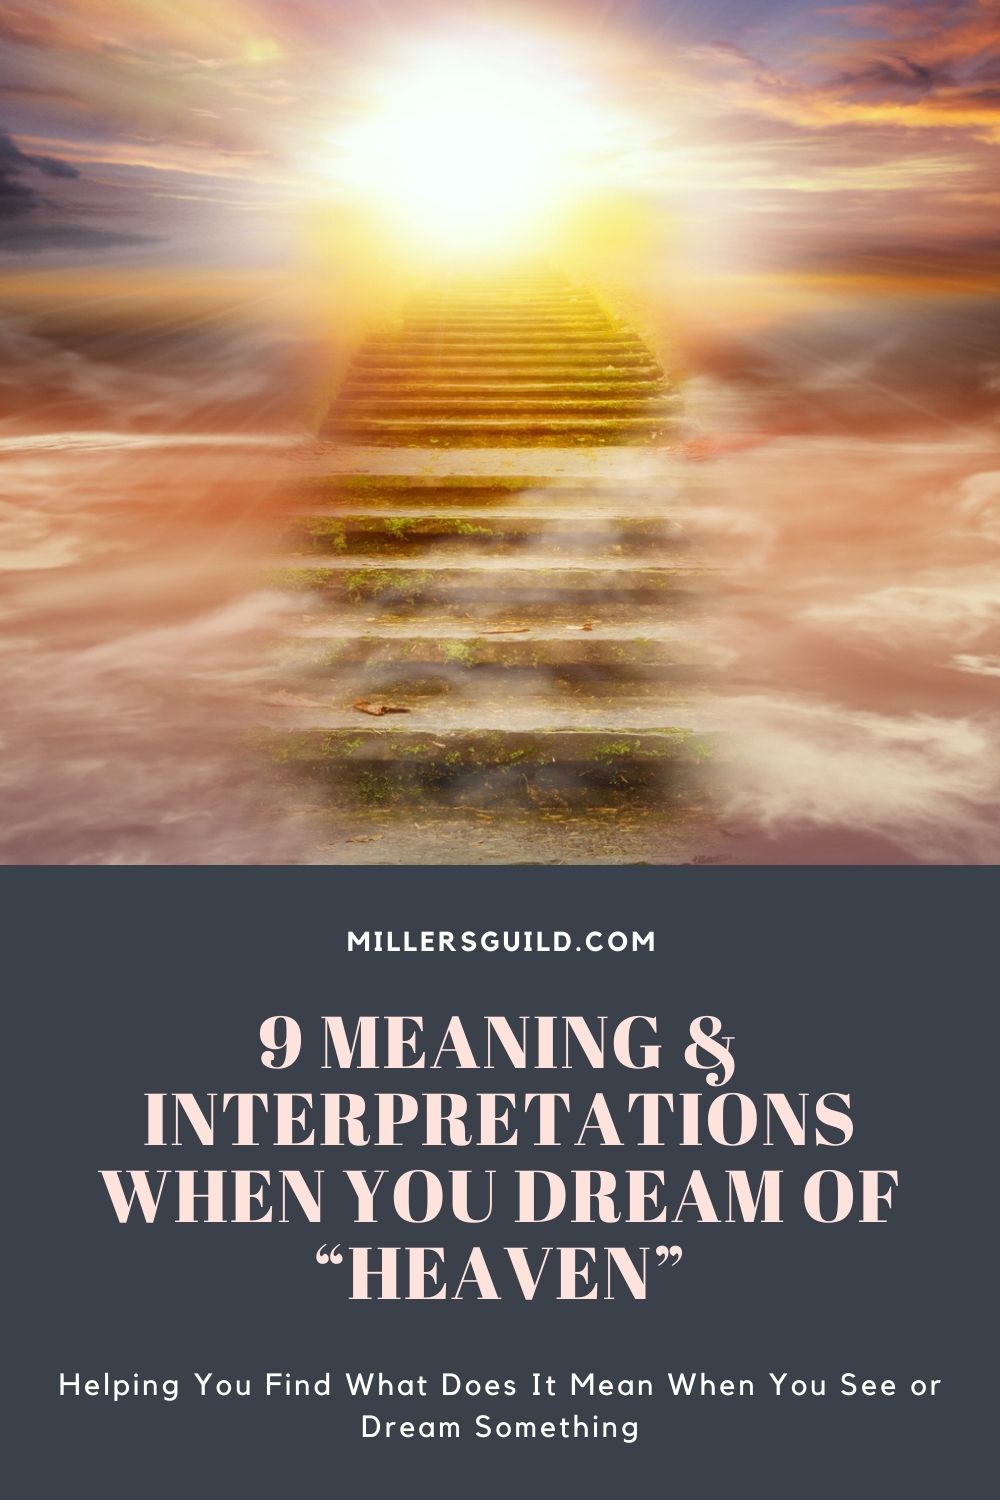 9 Meaning & Interpretations When You Dream of “Heaven” 2